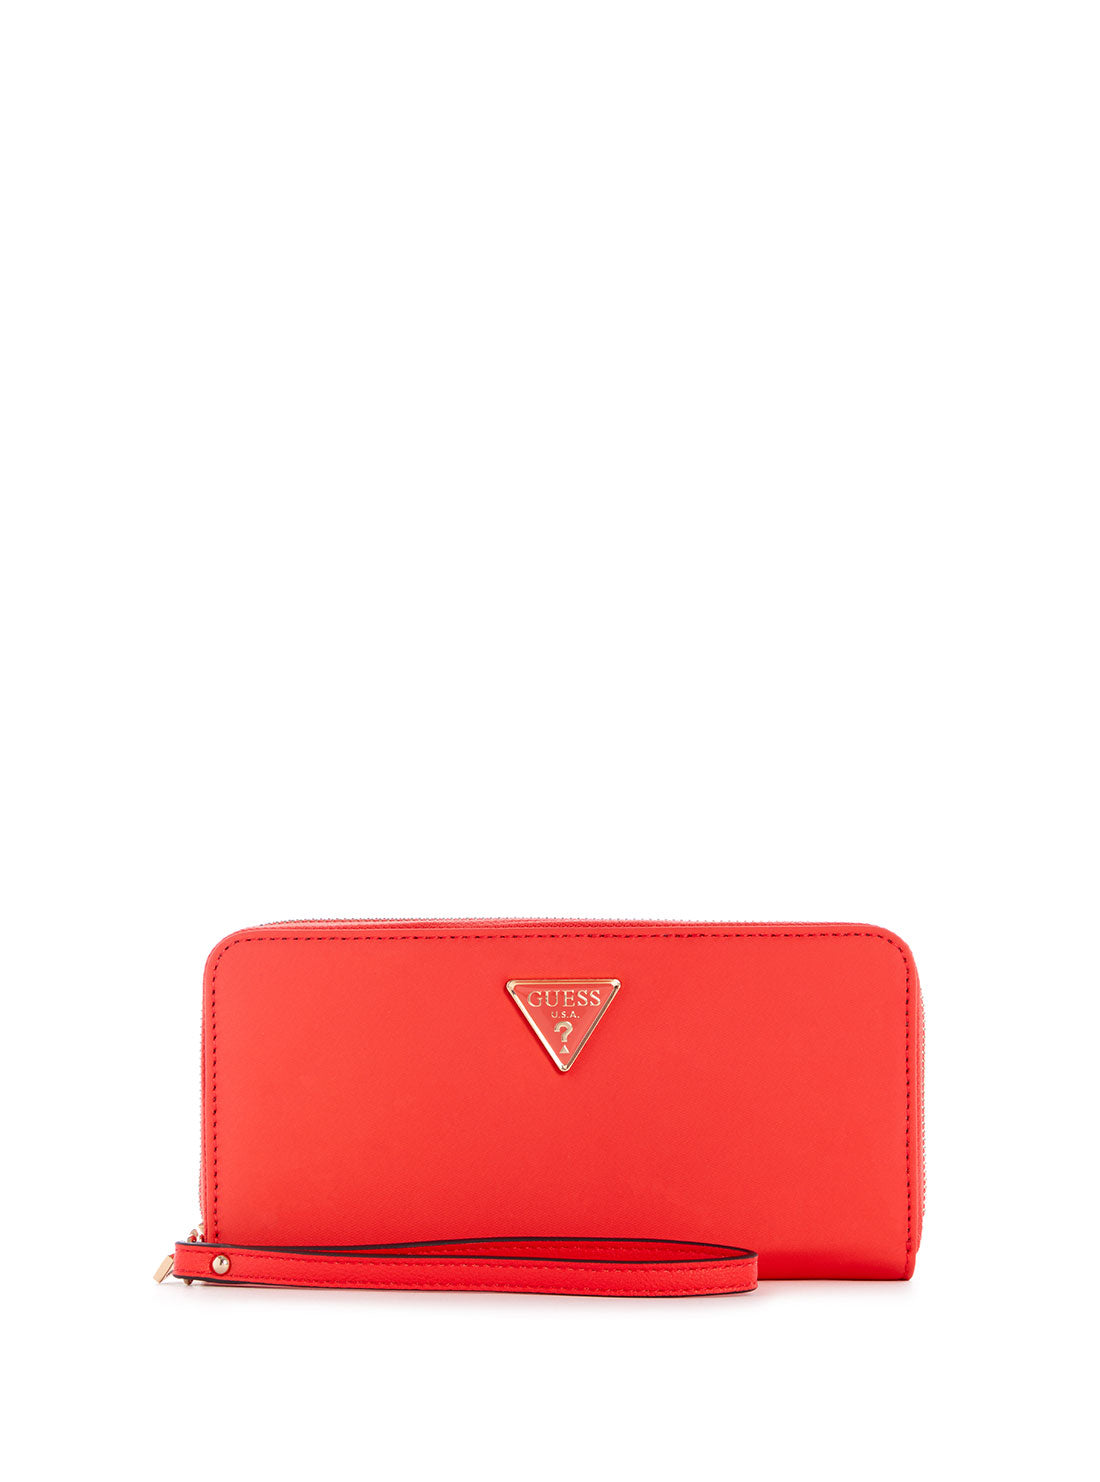 GUESS Women's Eco Red Gemma Large Wallet EYG839546 Front View